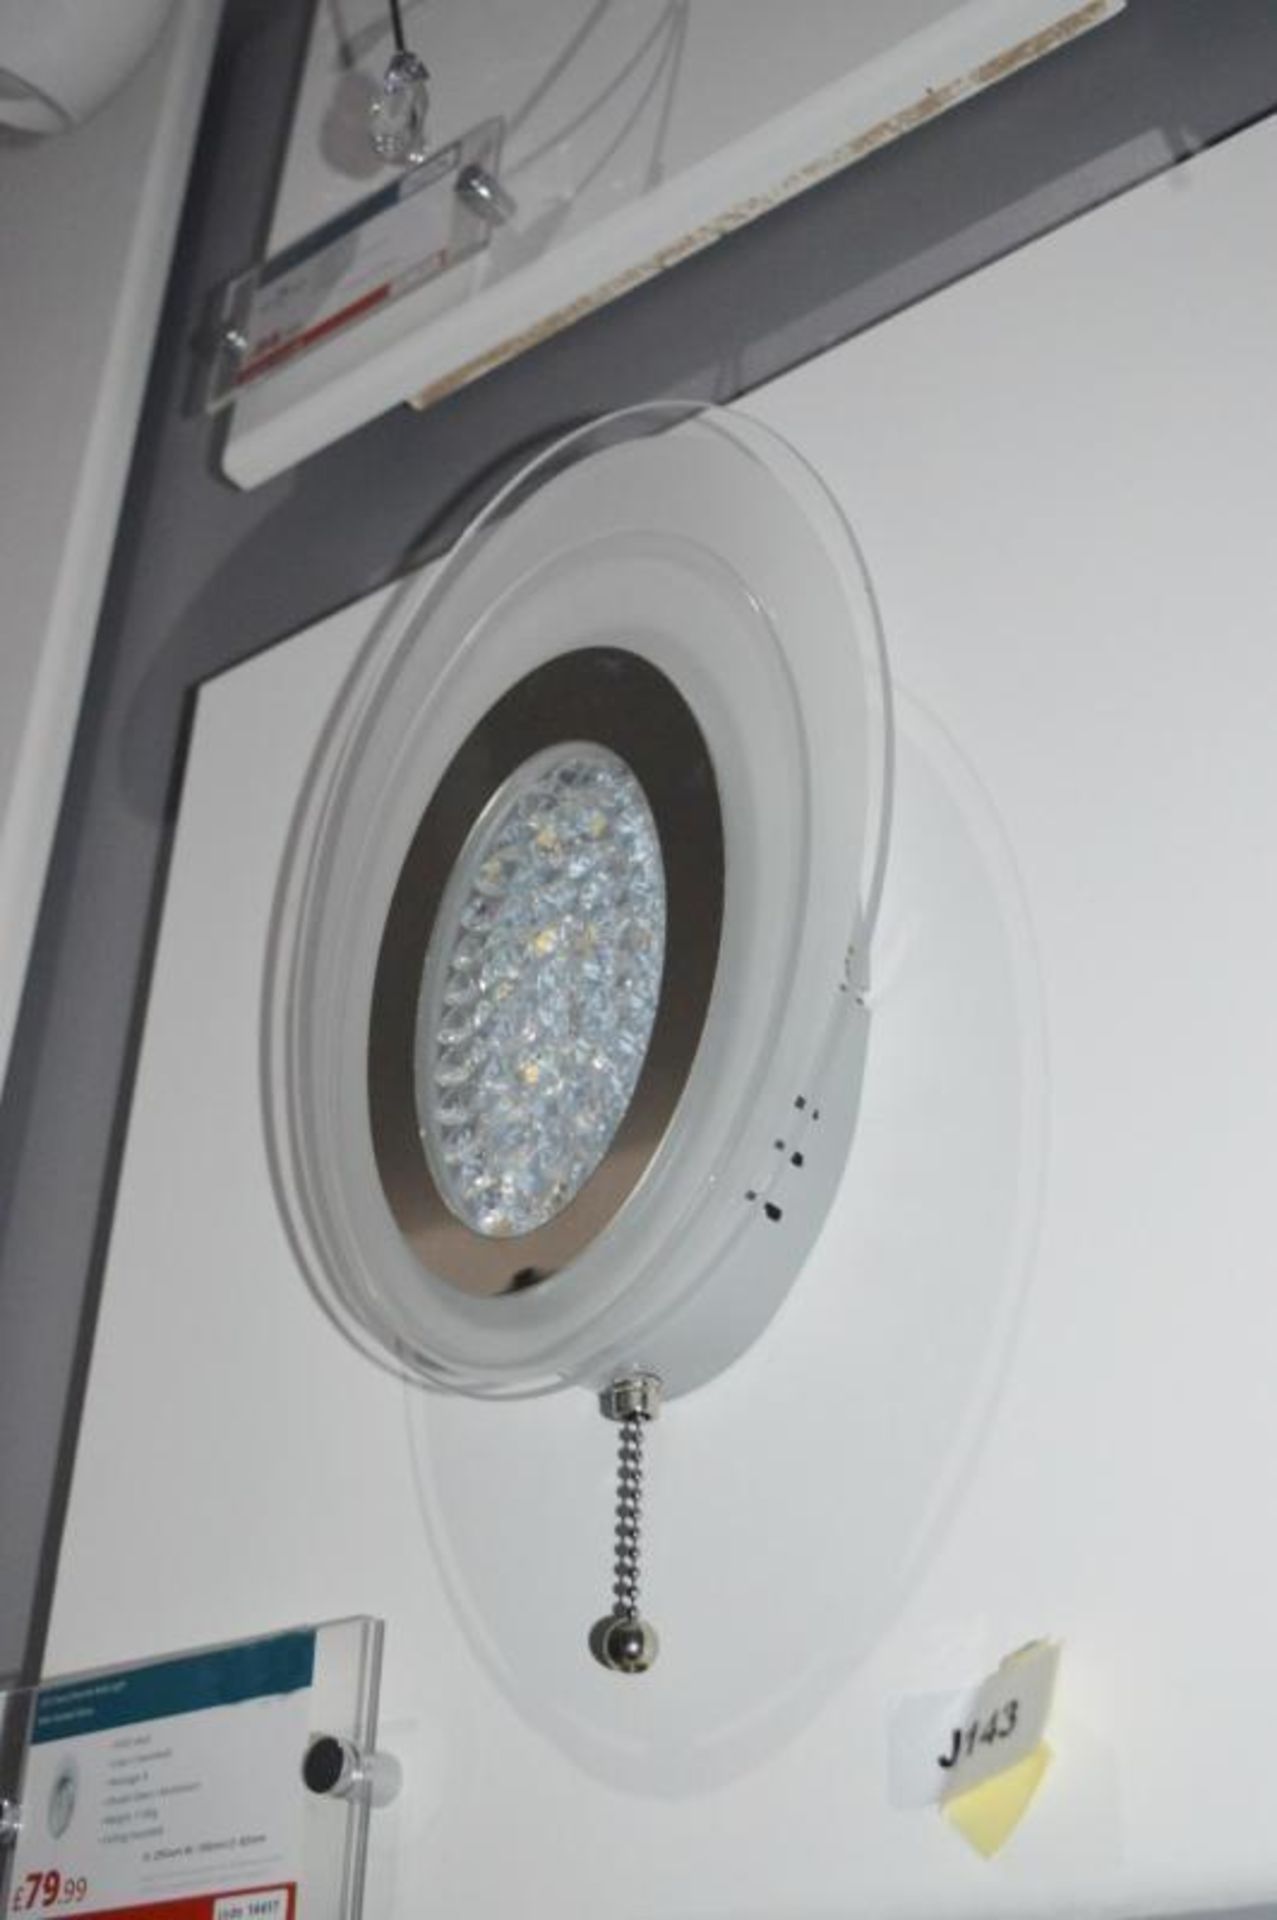 1 x LED Oval Chrome Wall Light With Frosted Glass - Ex Display Stock - CL298 - Ref J143 - Location: - Image 2 of 3